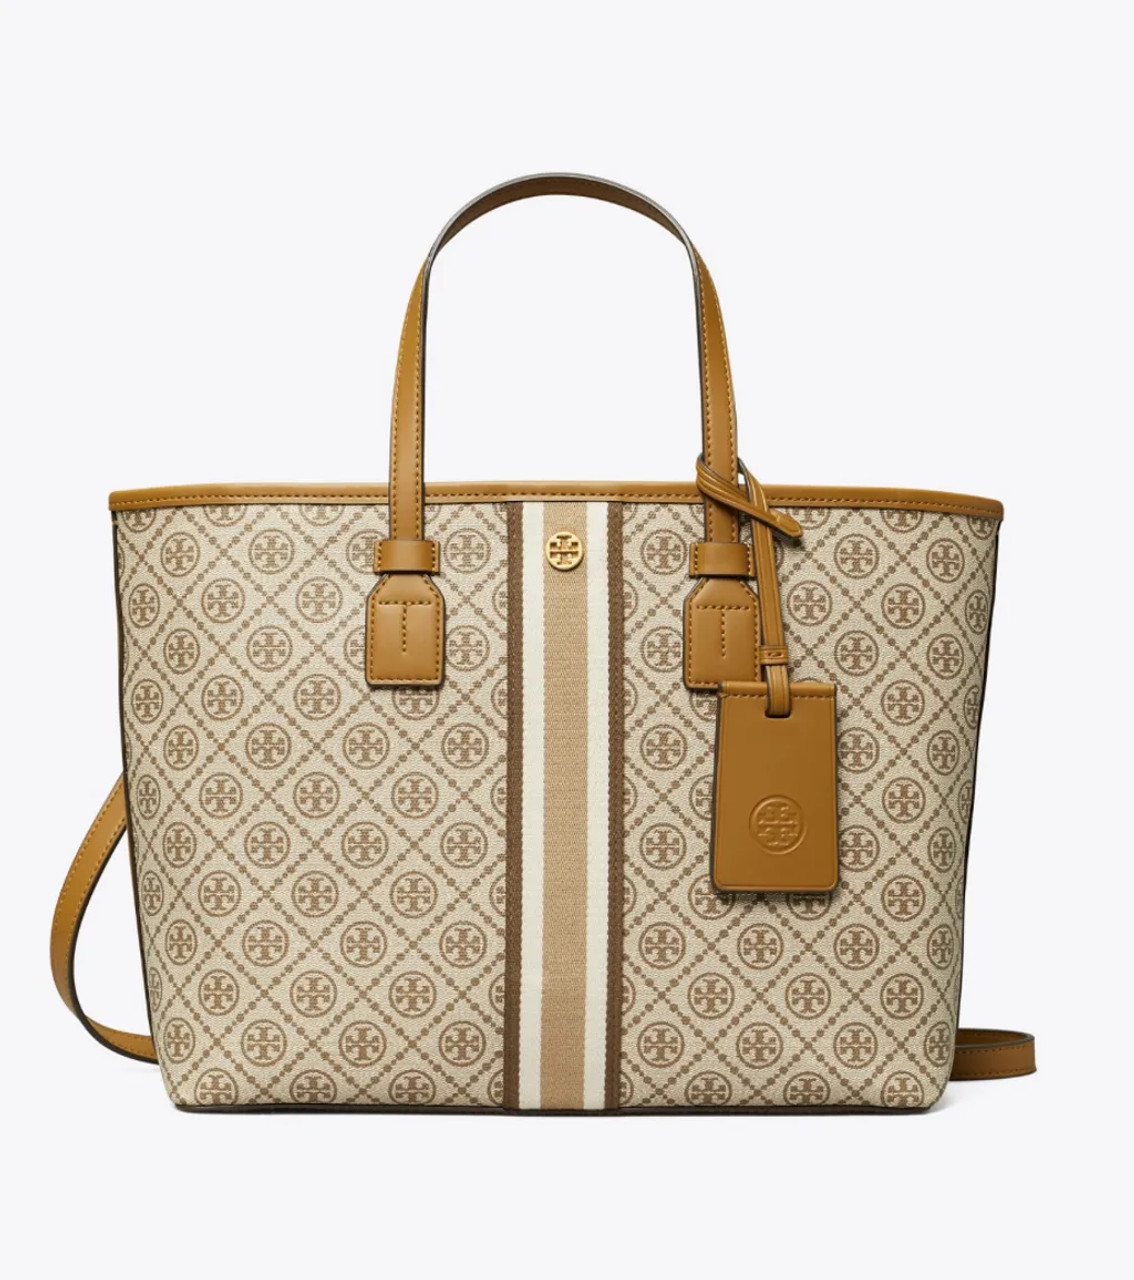 TORY BURCH T Monogram Coated Canvas Small Tote Bag